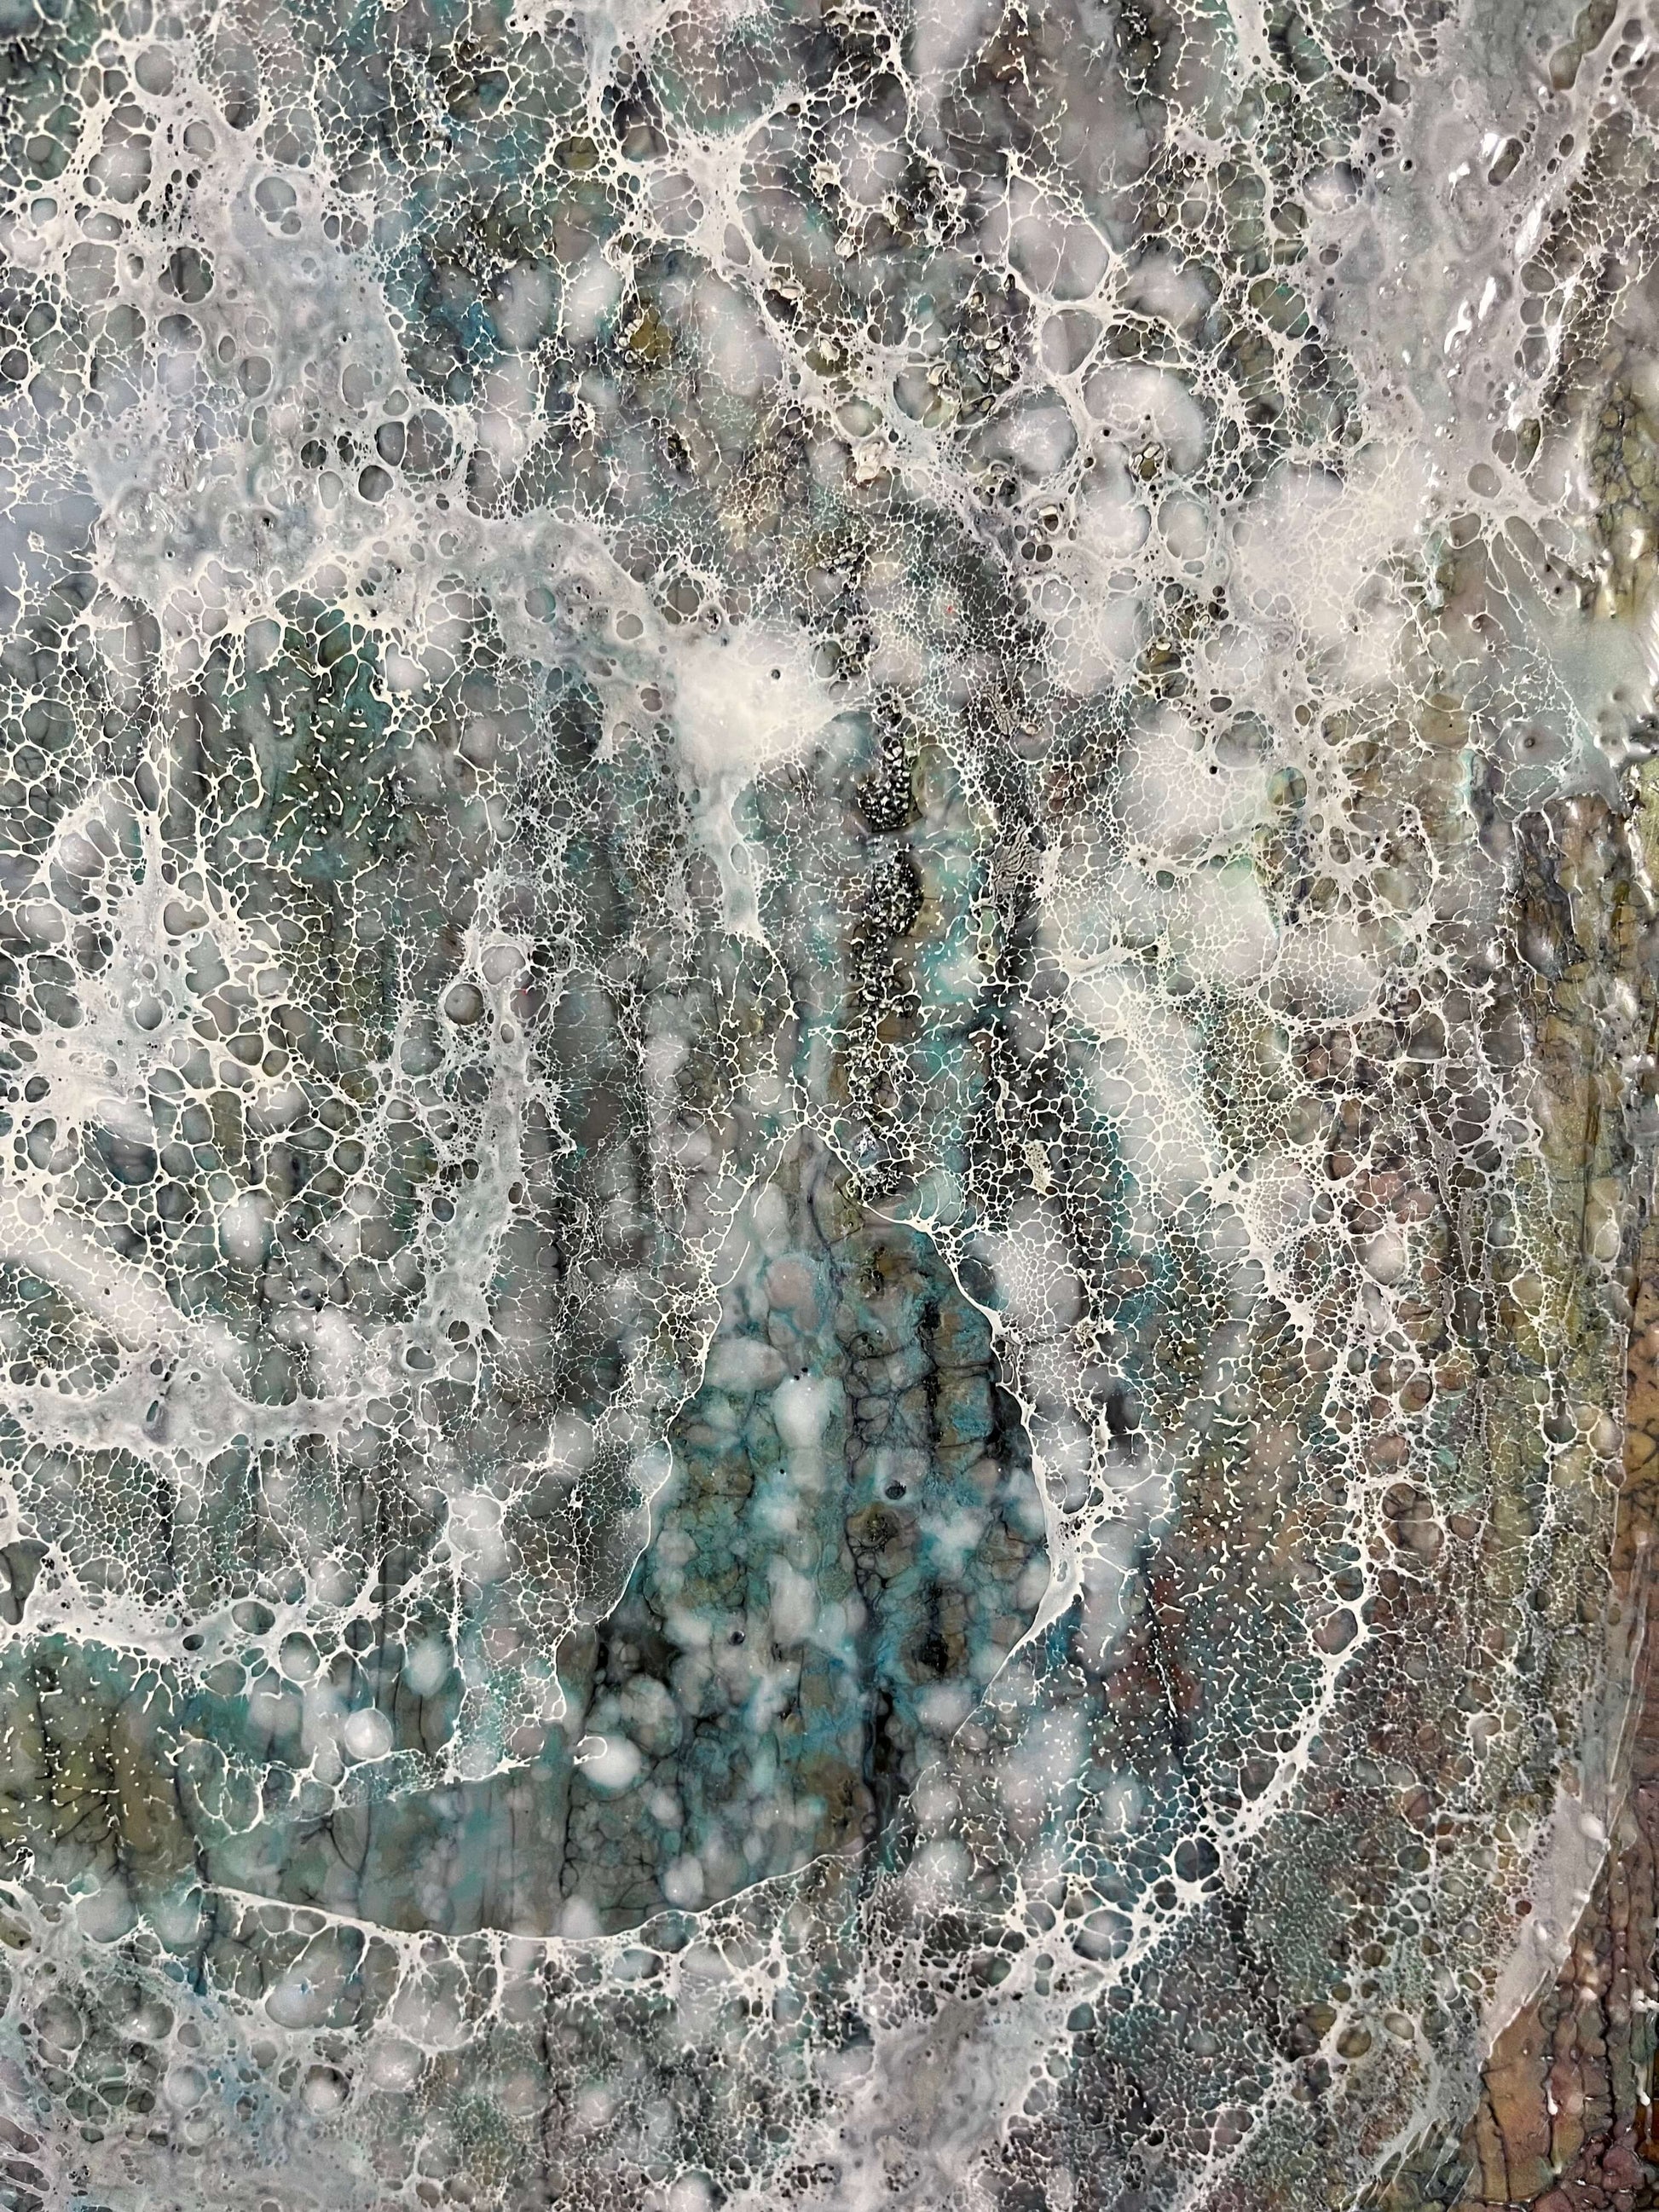 Close up.Abstract Encaustic Painting, 30x24in. Created with beeswax, damar resin, dry pigments and shellac on cradled wood panel. This painting was inspired and named after a piece of music by Caude Debussy-Francois-Joel Thiollier. This piece has a moody feel to it with colours of green, greys, browns and shellac cell-like texture swirling as if raindrops are falling out of grey sky onto a pond. Hanging hardware is included